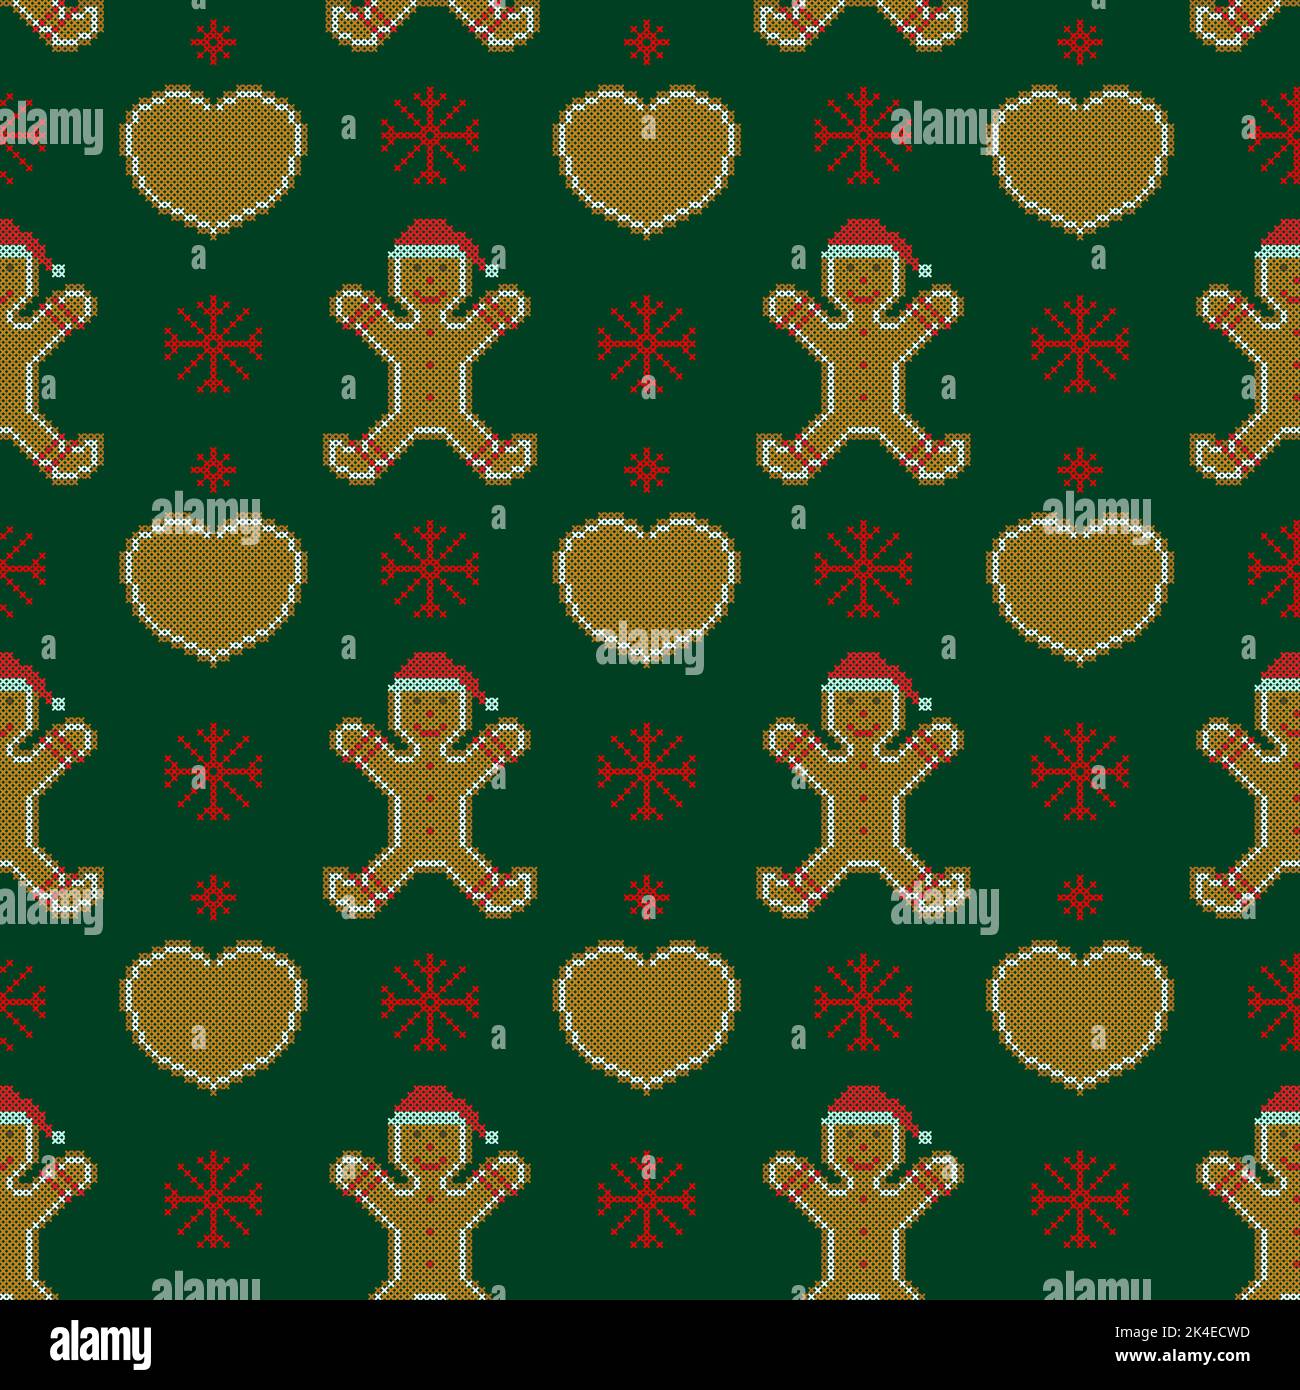 Merry Christmas vector seamless pattern. Gingerbread cookies cross stitch embroidery. Stock Vector